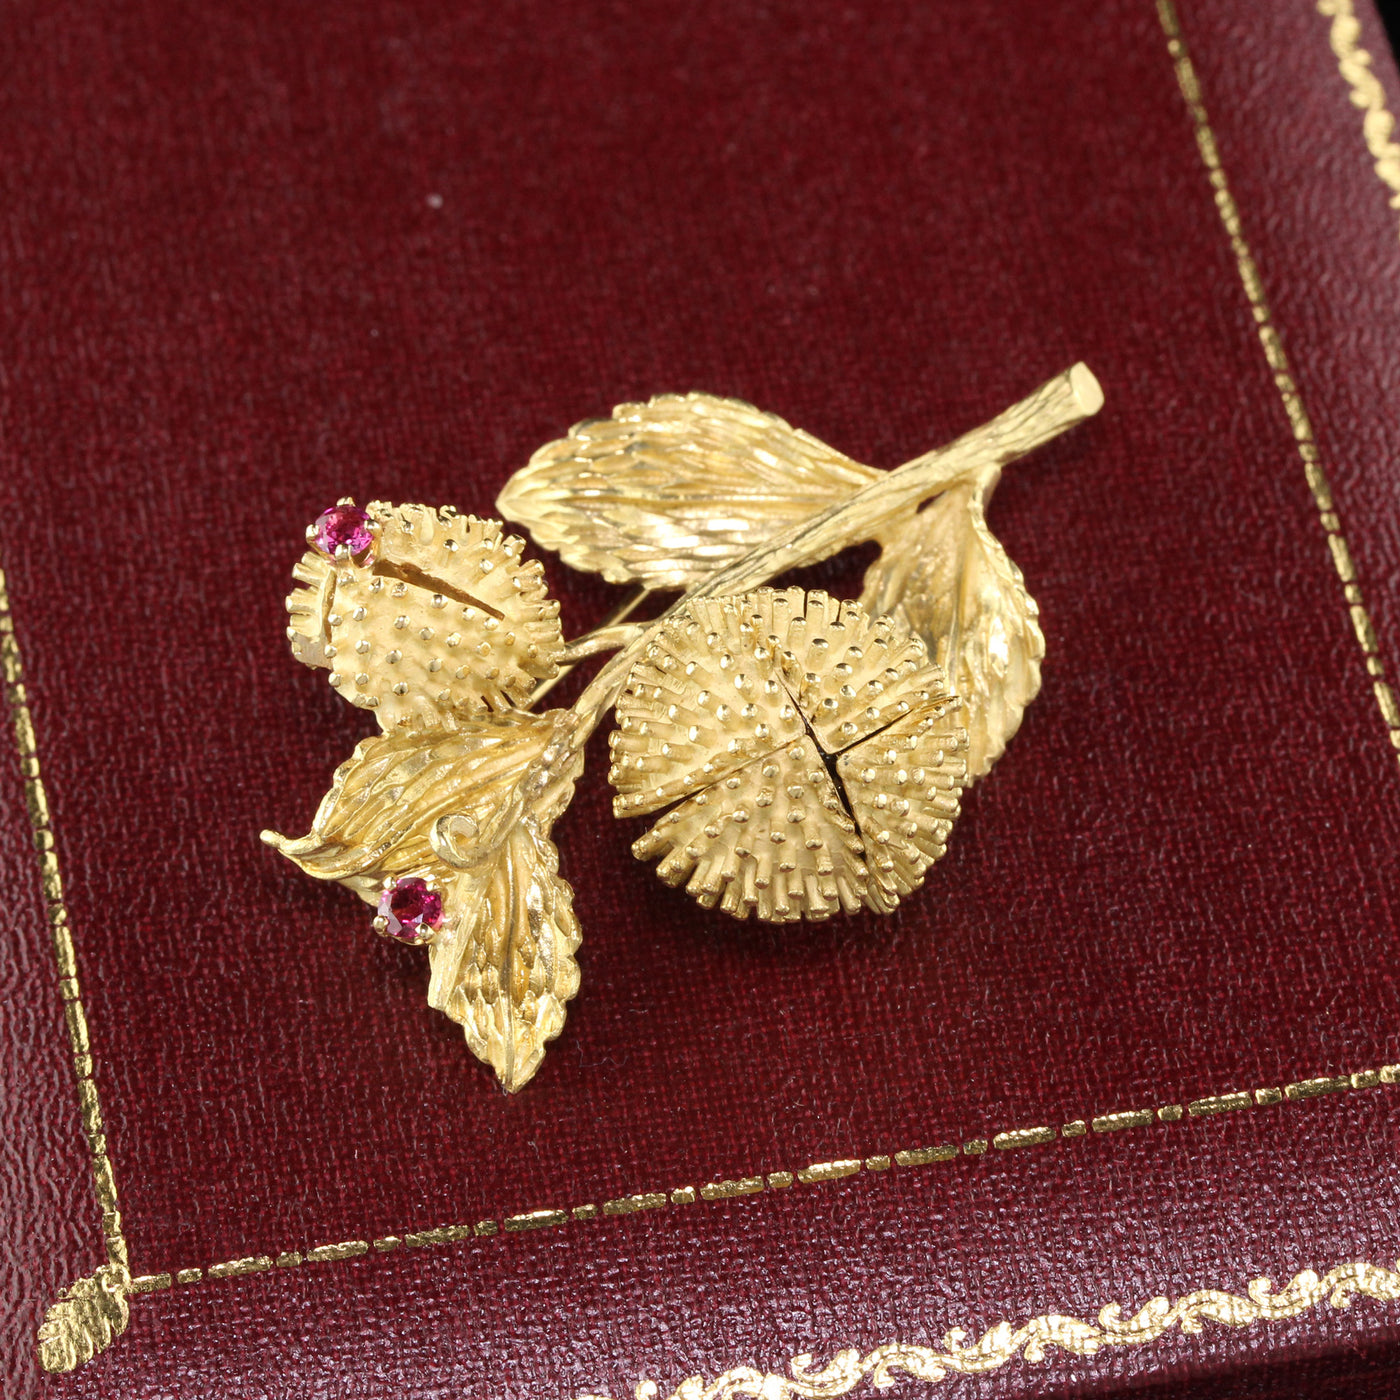 Vintage Estate Tiffany & Co 18K Yellow Gold Ruby and Diamond Flower Brooch